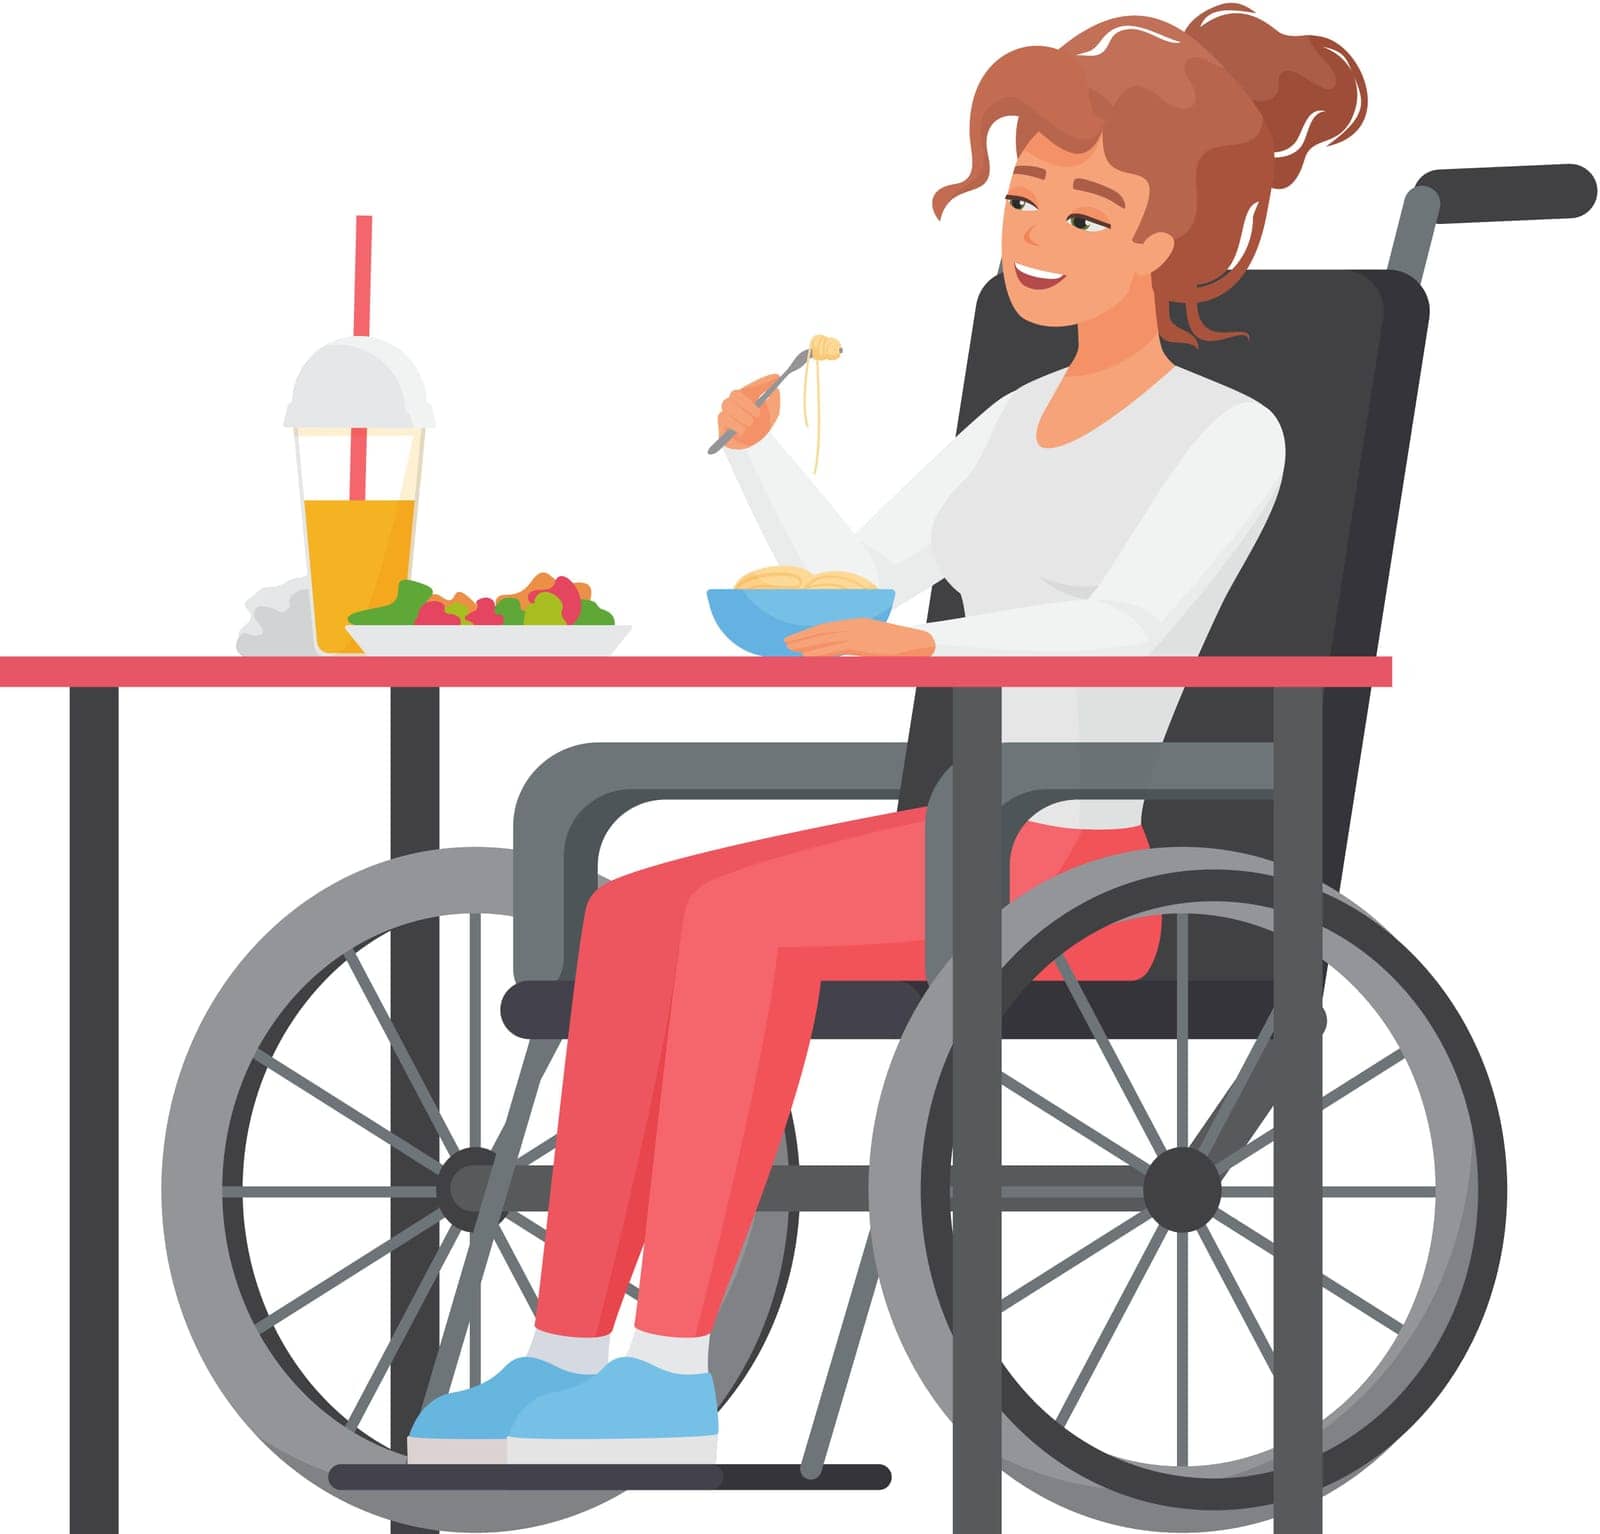 Woman in wheelchair having lunch. Lady with limited mobility eating cartoon vector illustration